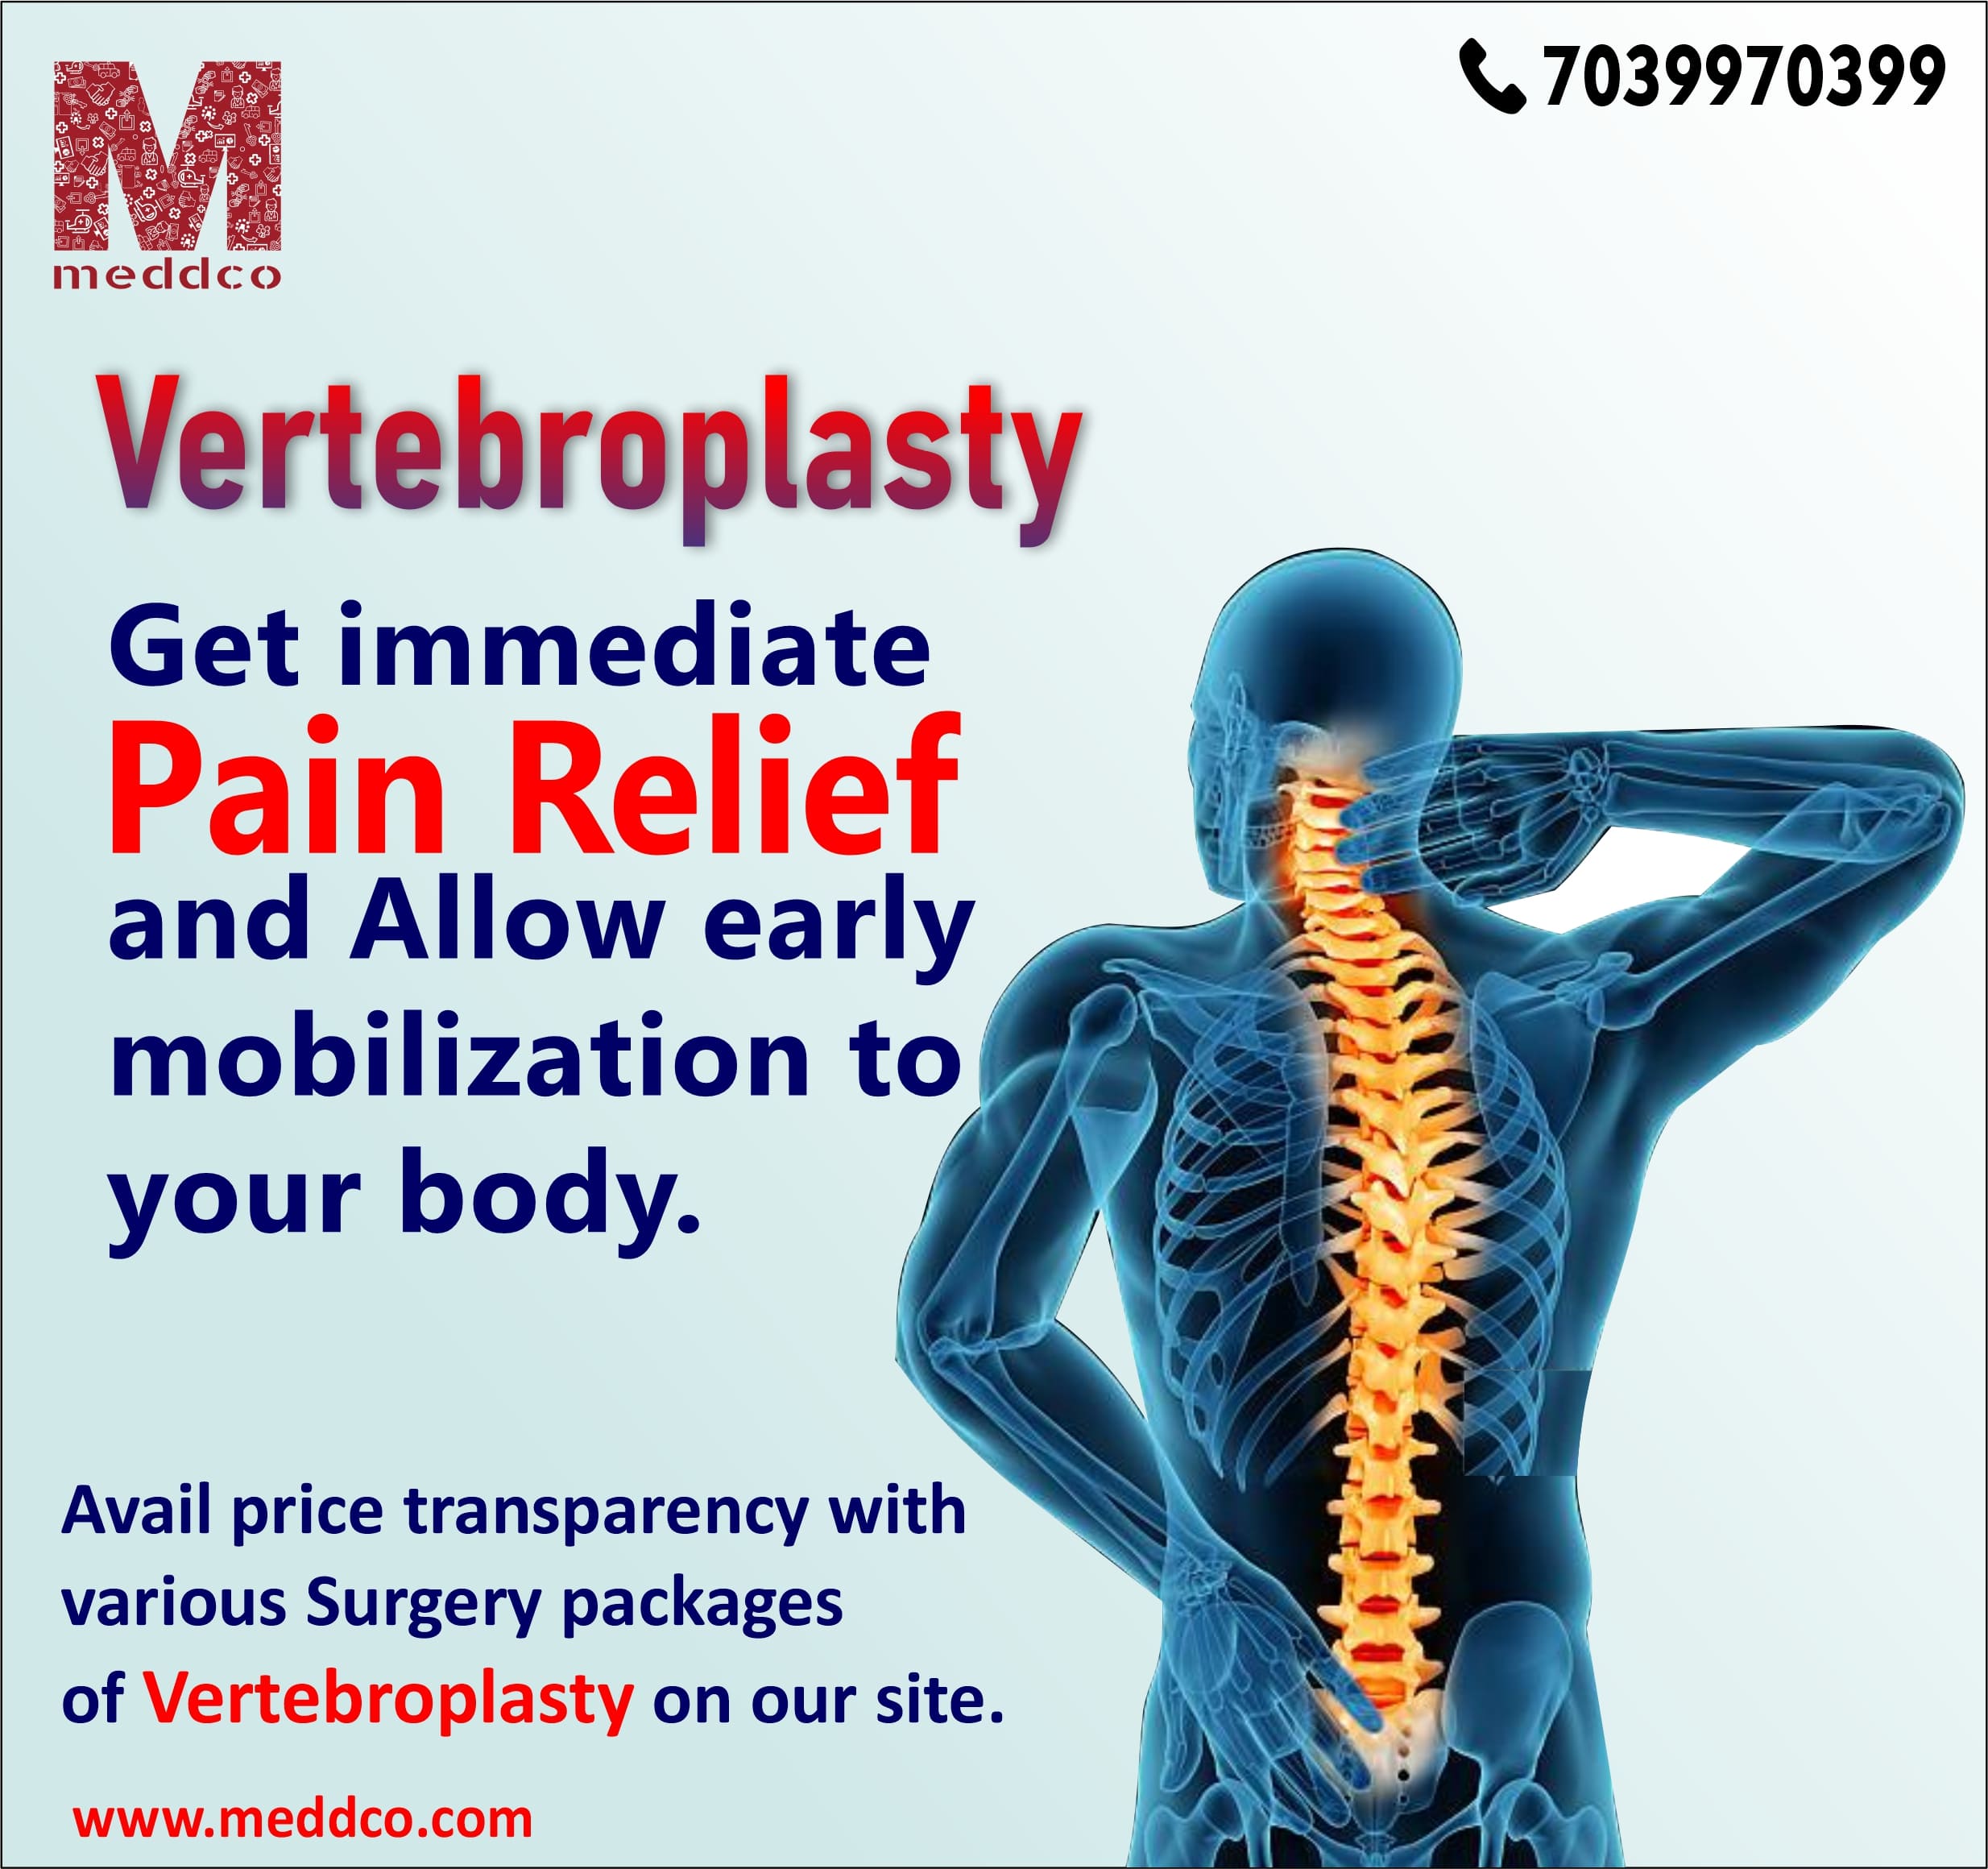 Improve the quality of your life with Vertebroplasty.